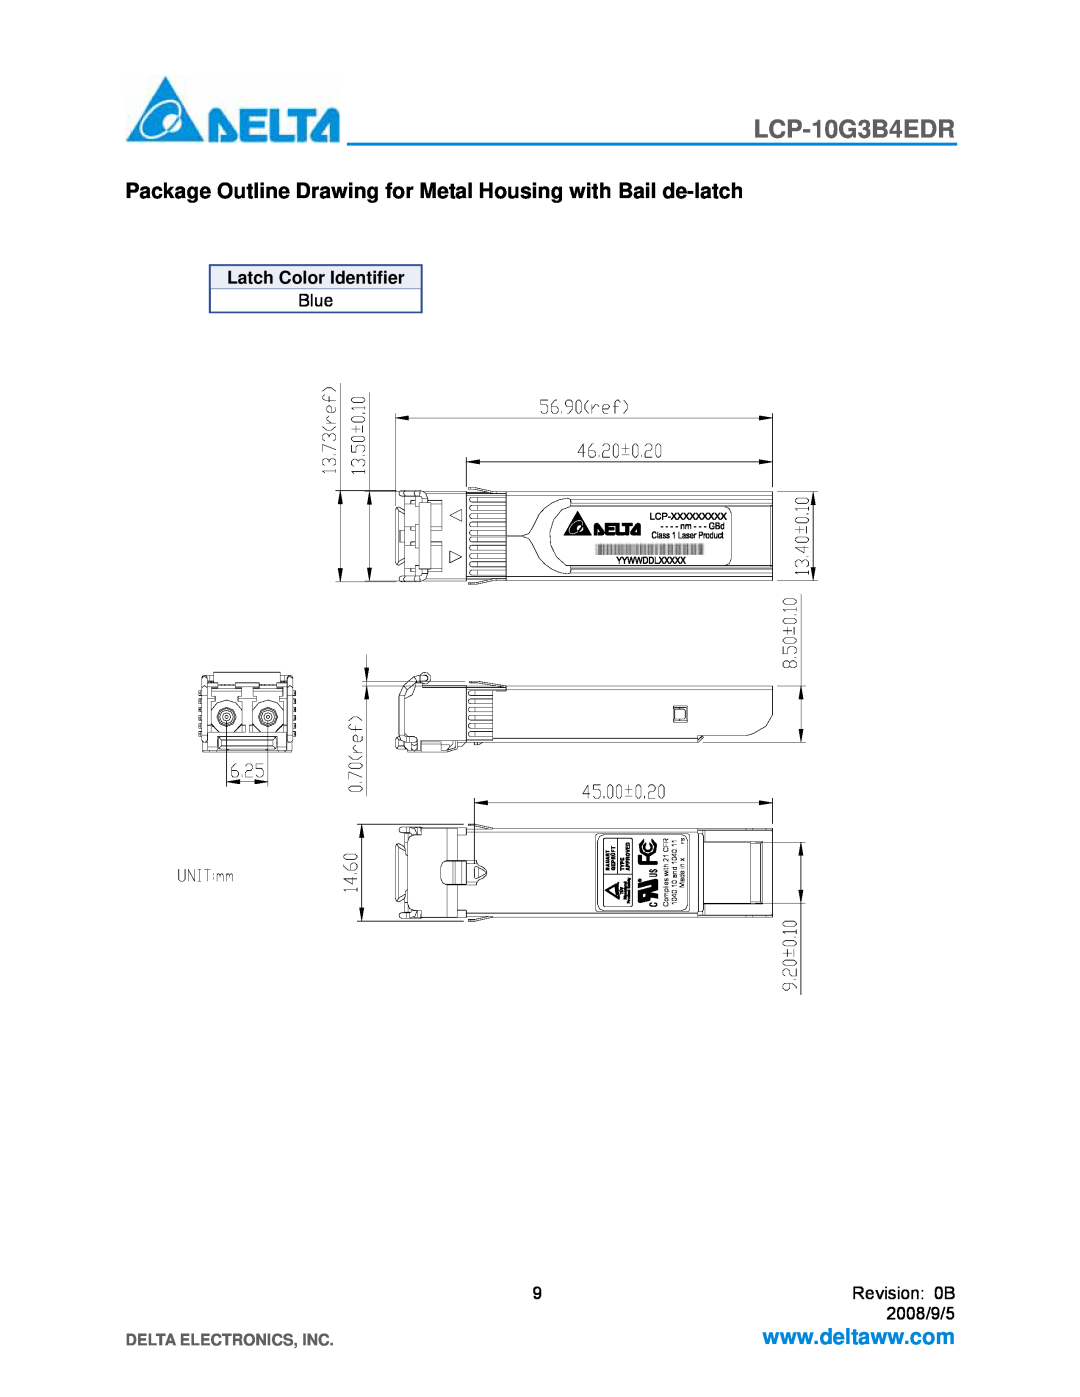 Delta Electronics LCP-10G3B4EDR manual Package Outline Drawing for Metal Housing with Bail de-latch, Latch Color Identifier 